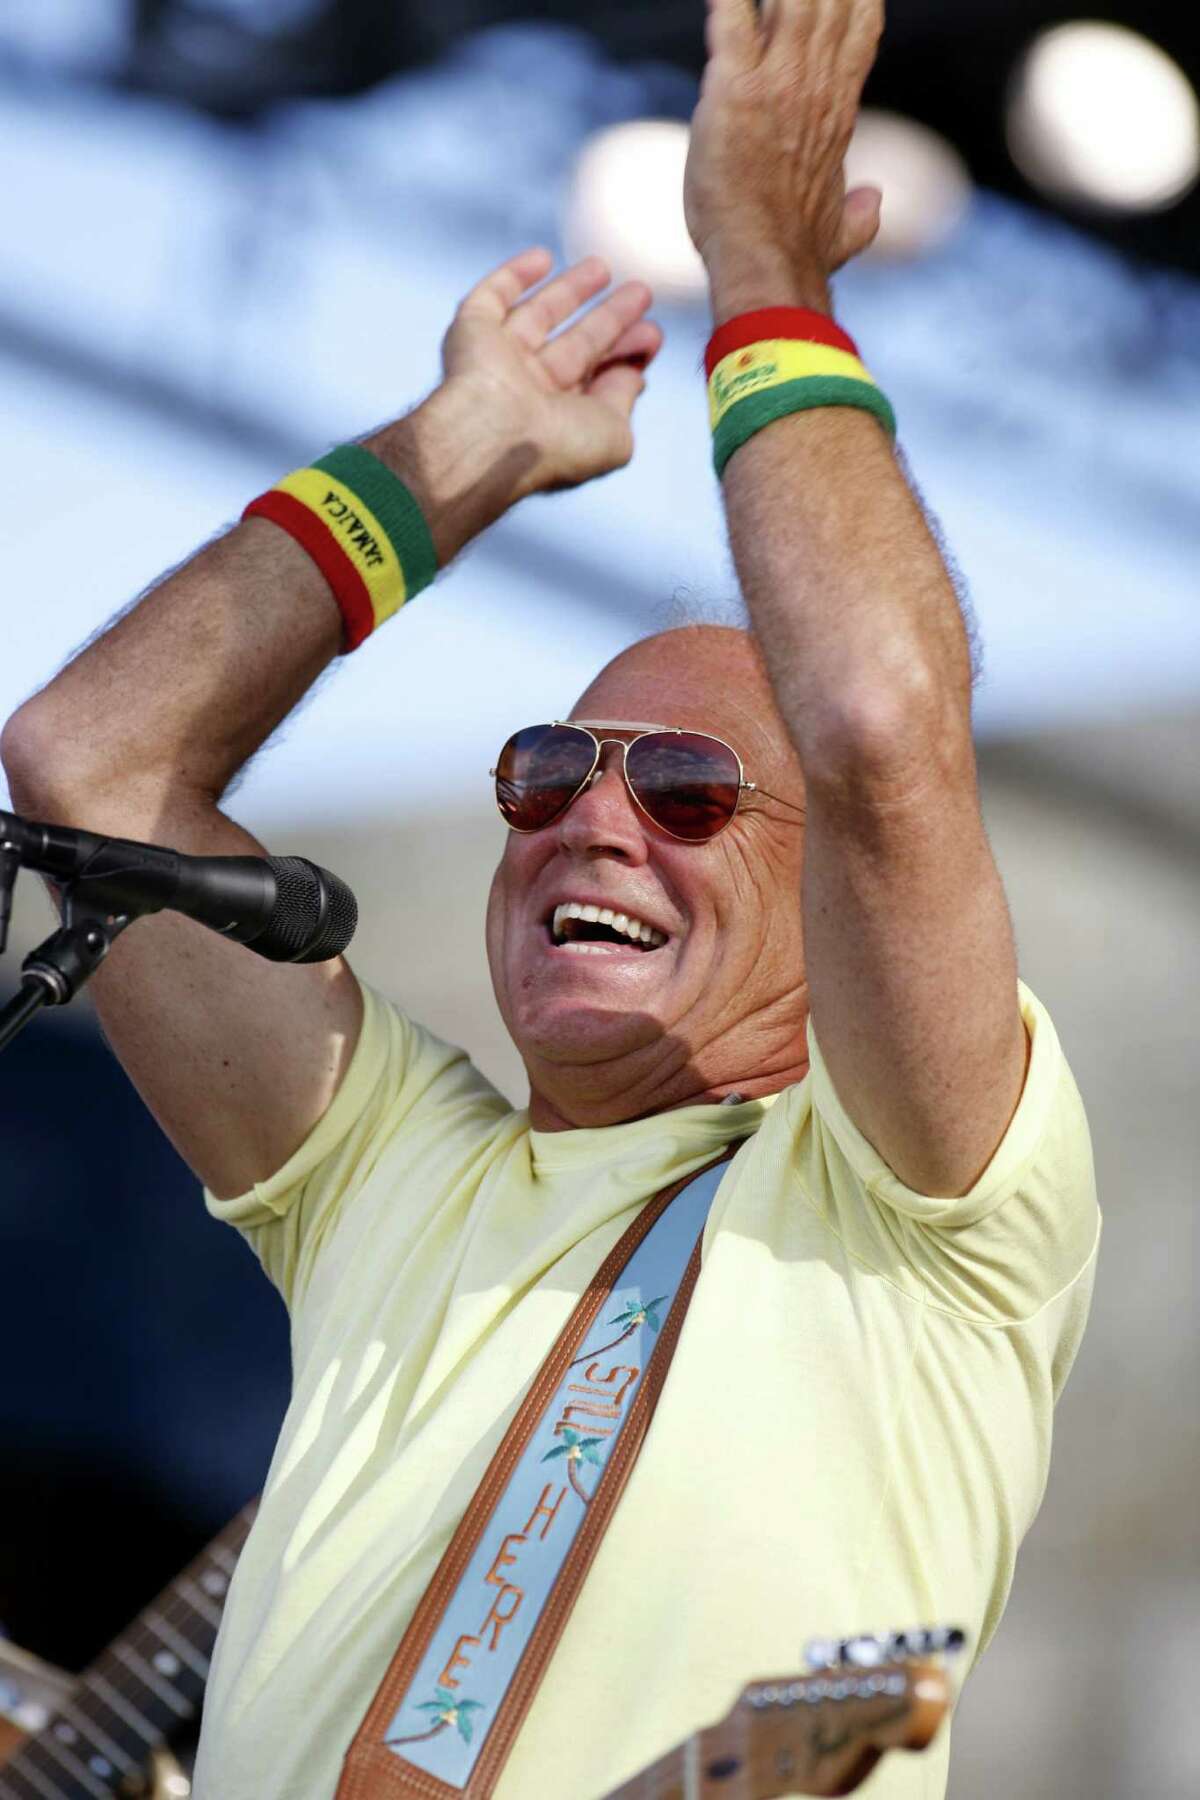 Tickets go on sale Saturday for the May 2 Jimmy Buffett performance at Austin's new Tower Amphitheater.